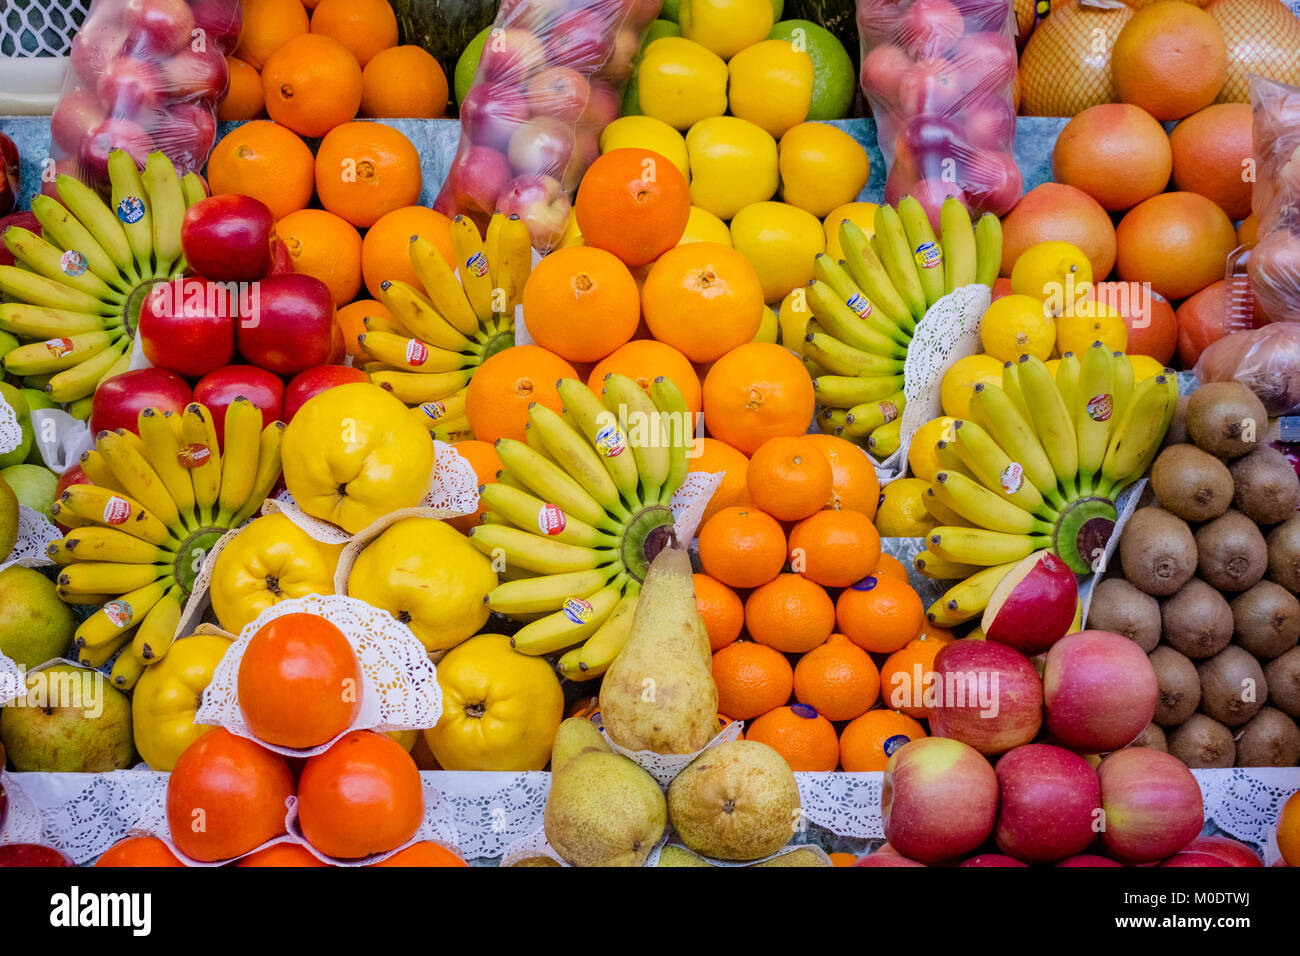 fruit mix, combination of different fruits, decoration on market stall,  fruits in different colors, apples, plums, avocados, kakis, pears, kiwis  mango Stock Photo - Alamy